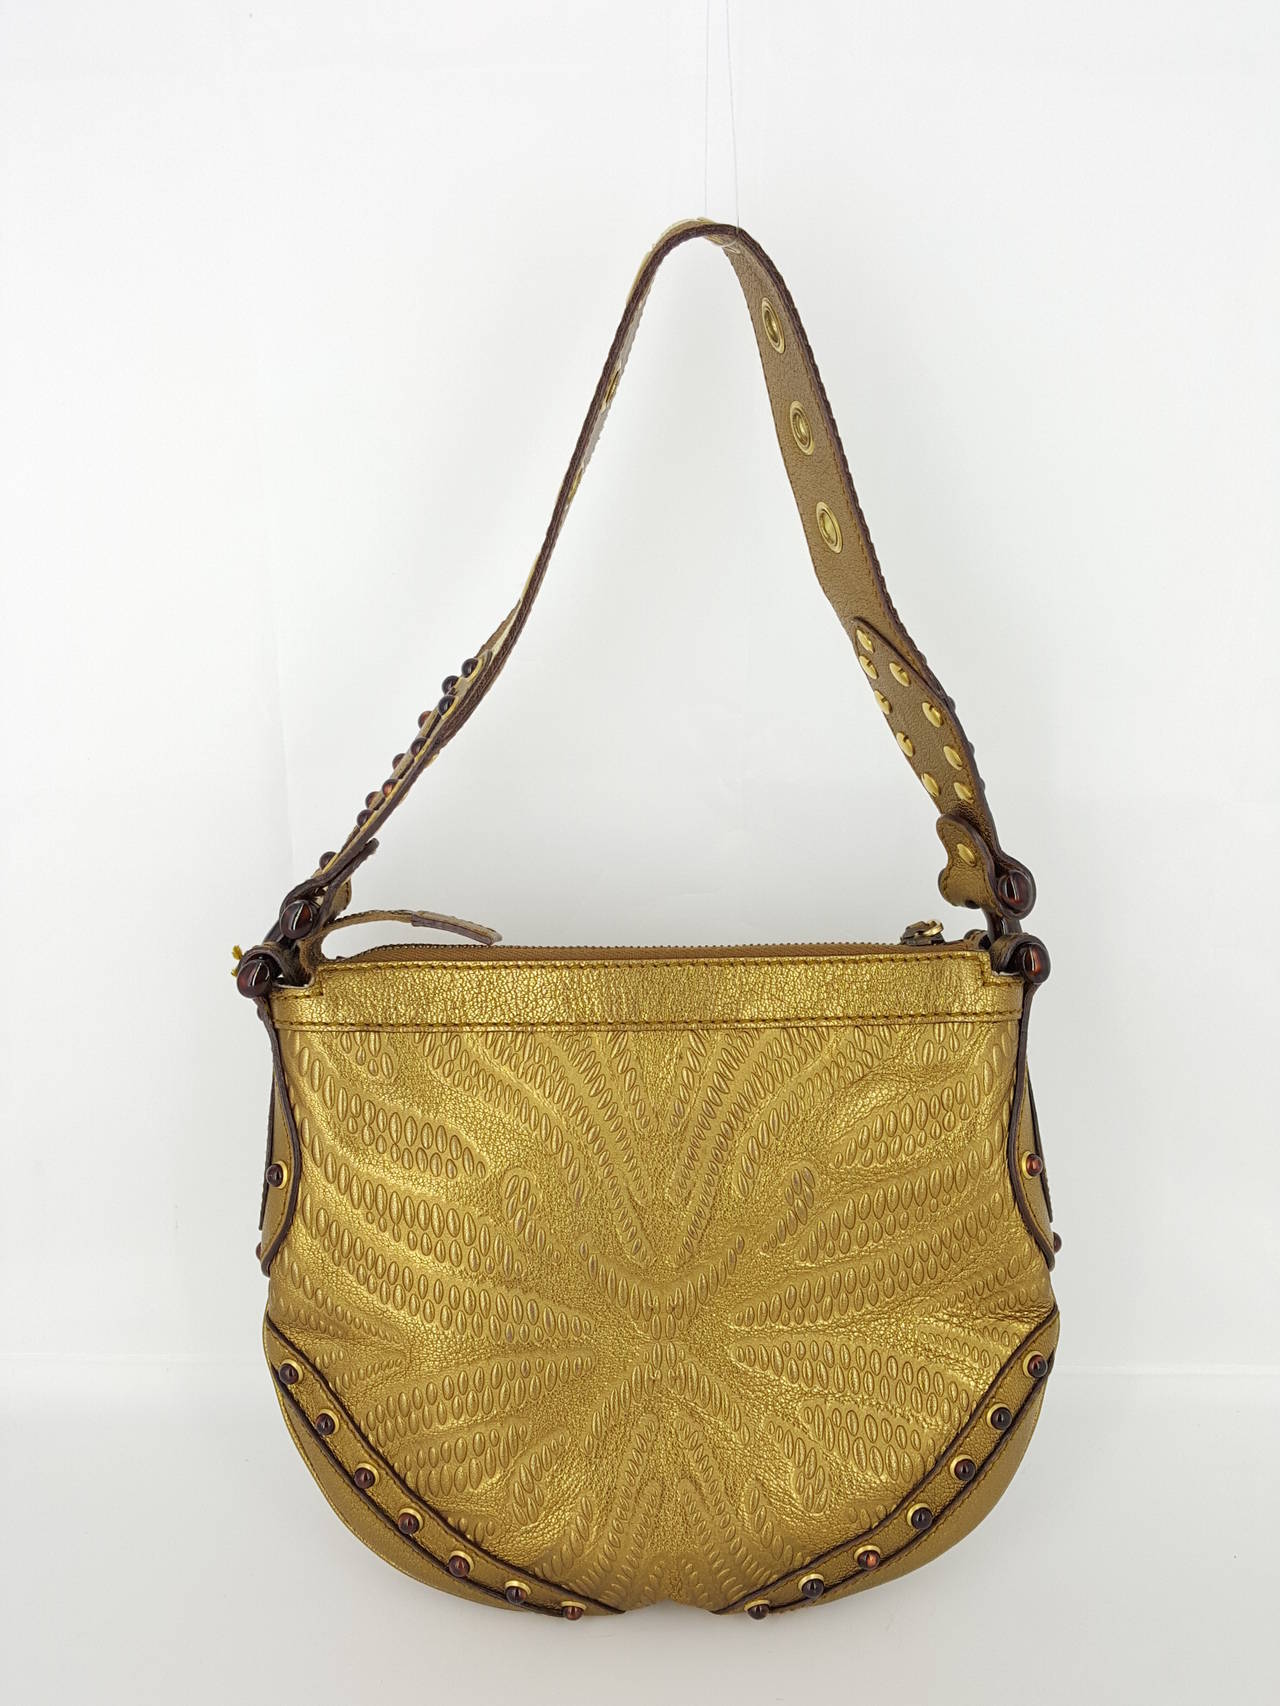 Offered for sale is this limited edition Gucci Pelham small hobo with tortoise glass cabochon embellishments.  This has  never been carried and is in excellent condition.  Thee embossed leather and the glass stones make this a stunning bag.  The